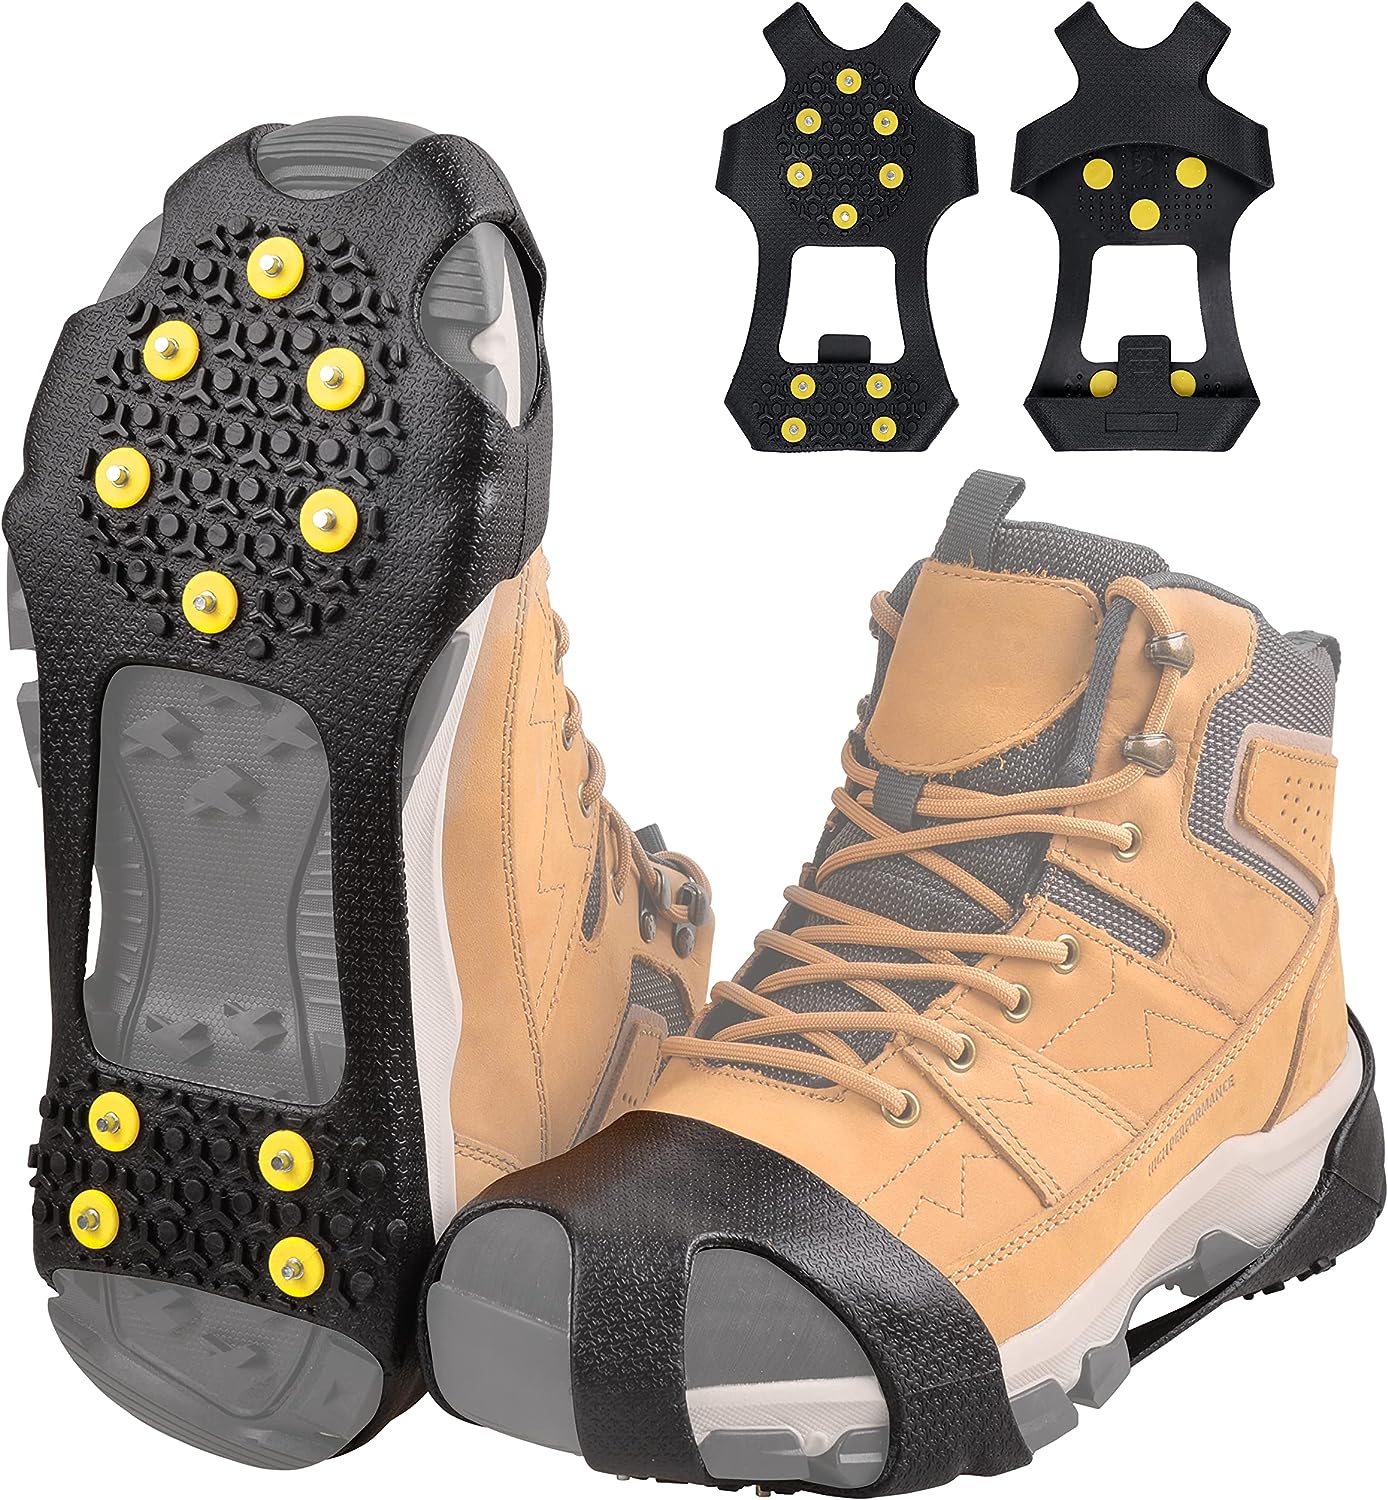 Ice Snow Traction Cleats Crampons Anti-Slip Snow Shoes [...]